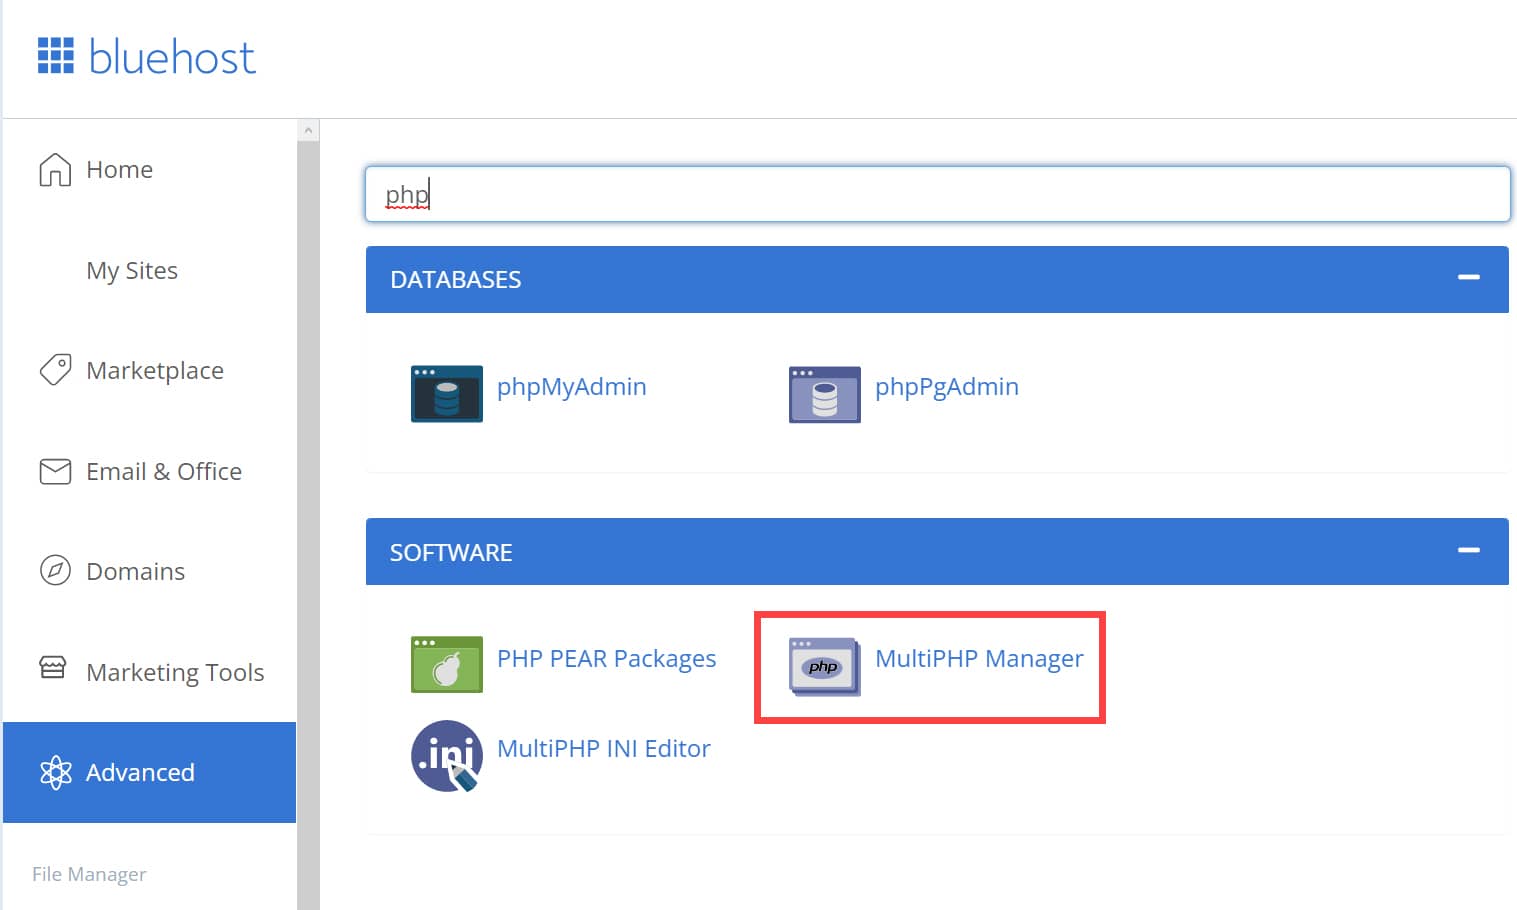 How to update PHP versions in Bluehost's Shared Hosting